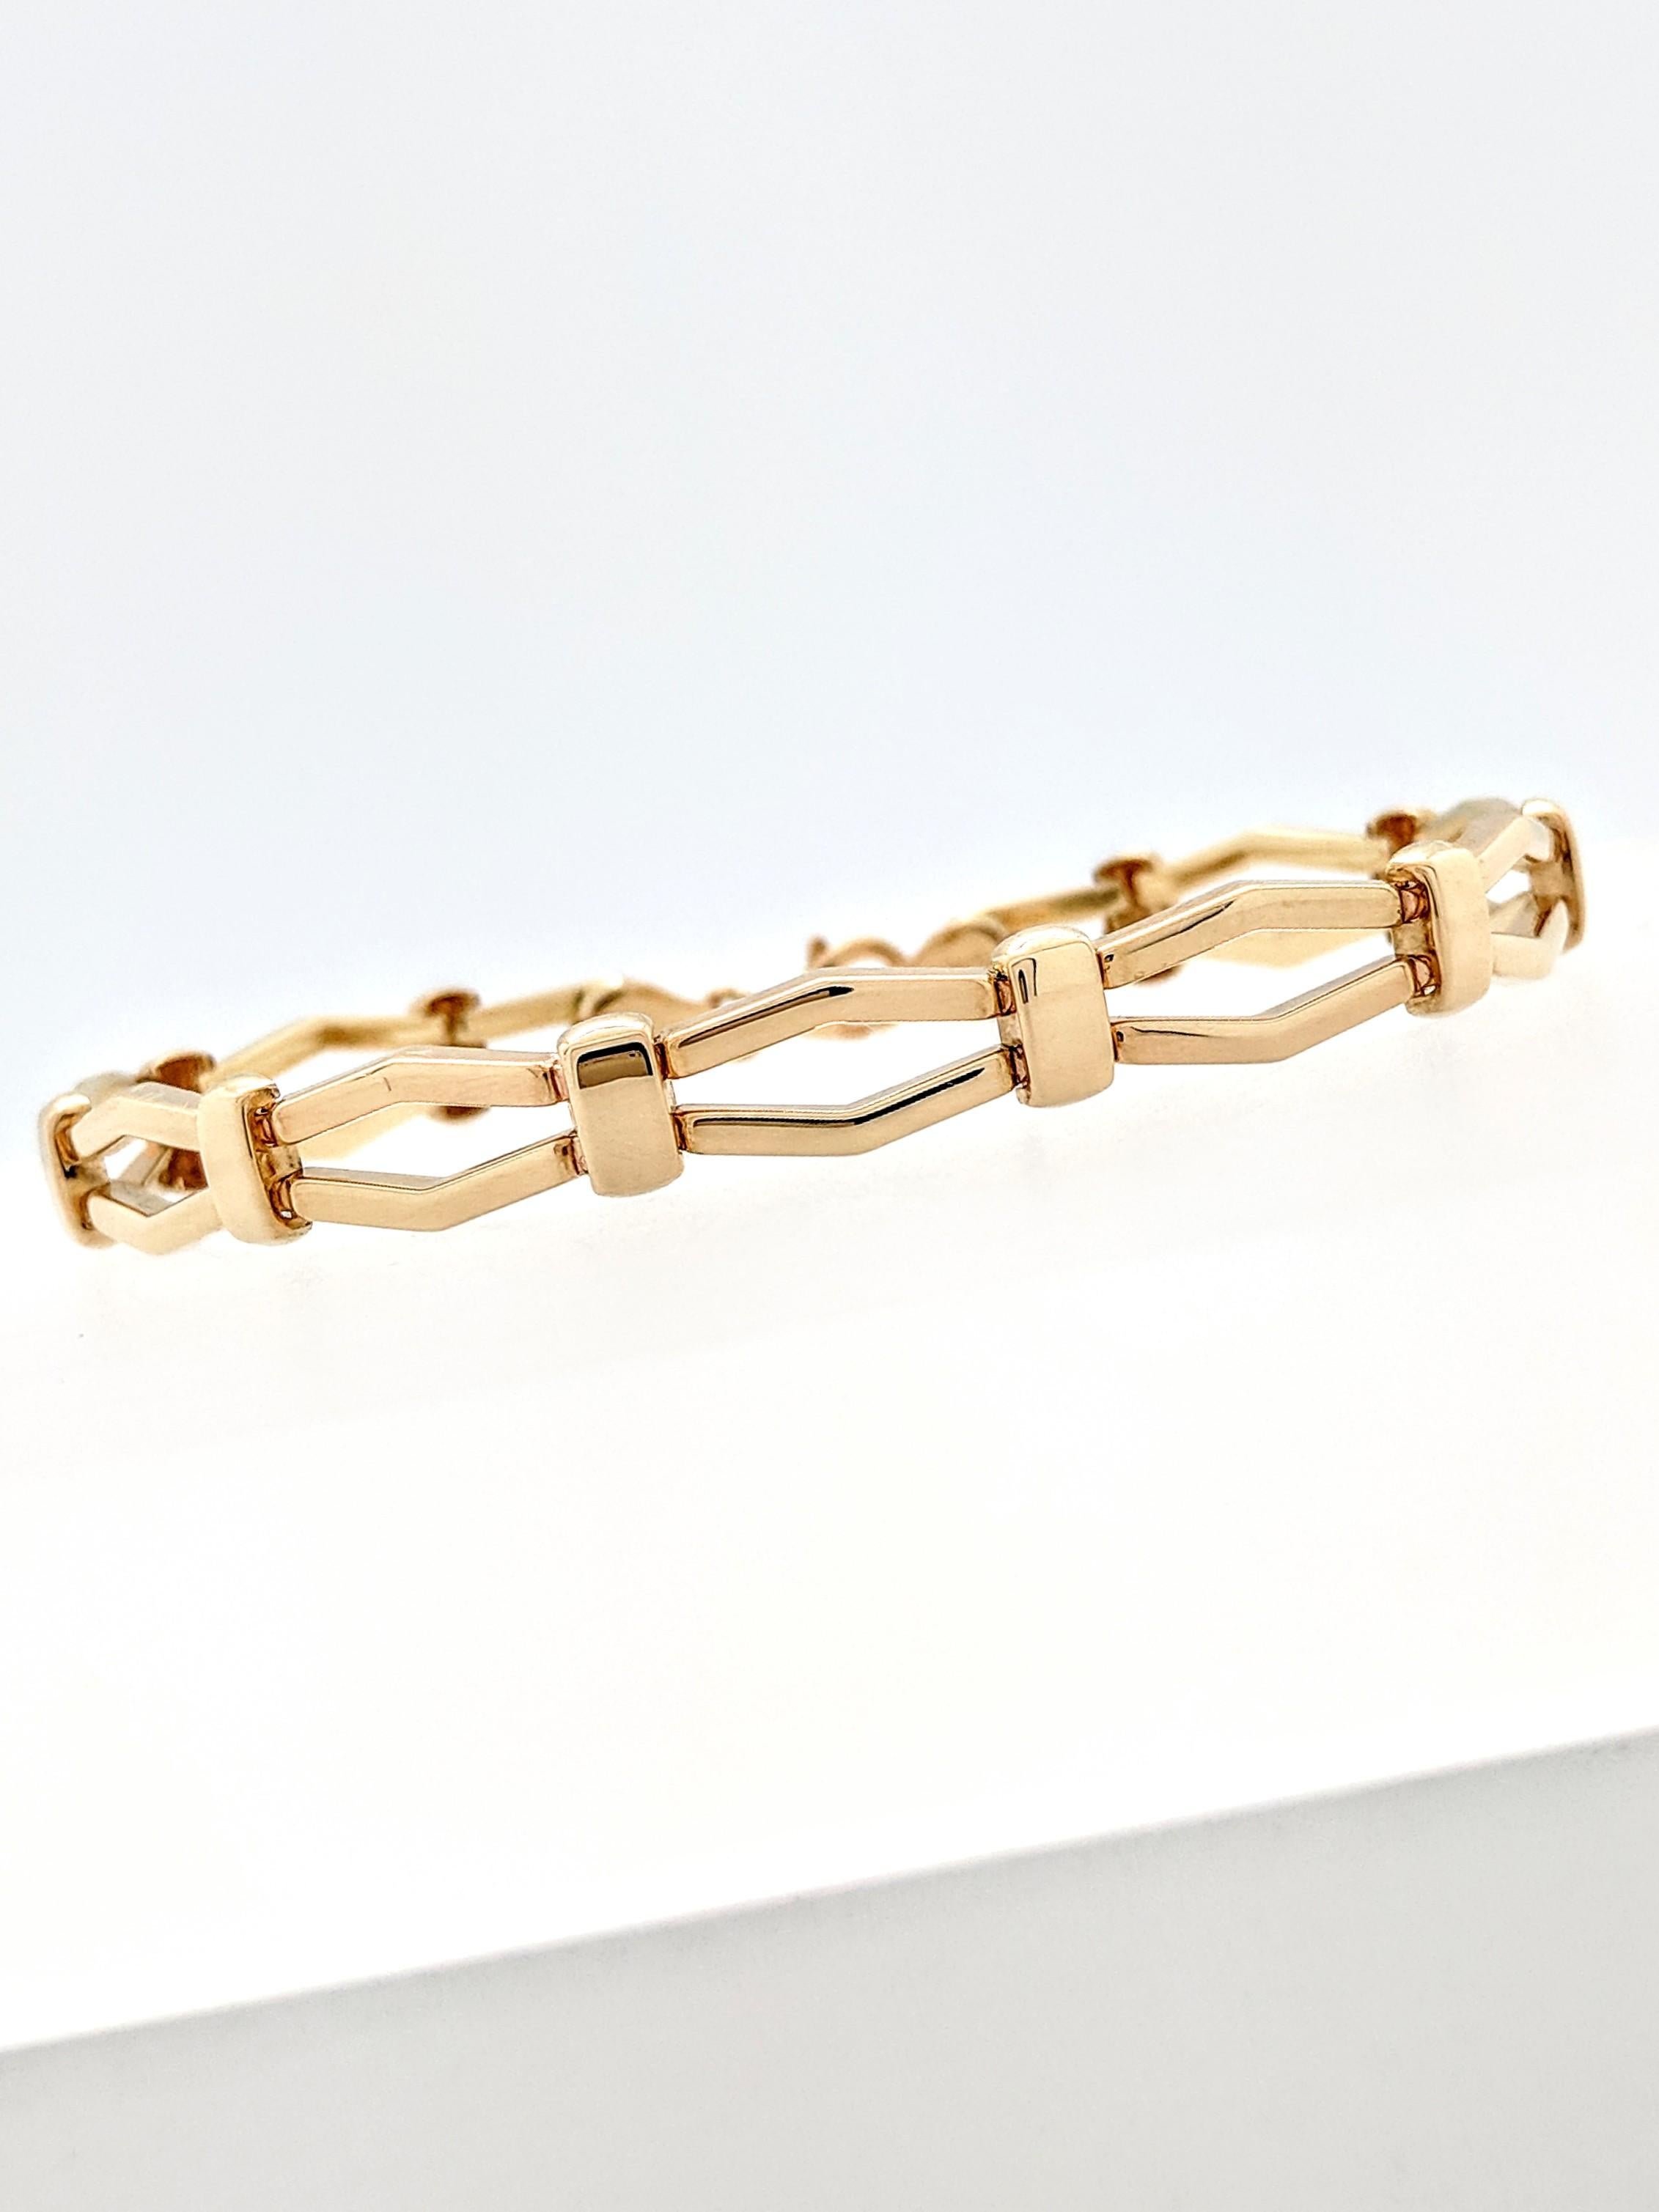 14k Yellow Gold Fancy Link Bracelet

You are viewing a beautiful fancy link bracelet.

The bracelet is crafted from 14k yellow gold and weighs 5.1 grams. It measures 7mm in width and will fit up to a 7